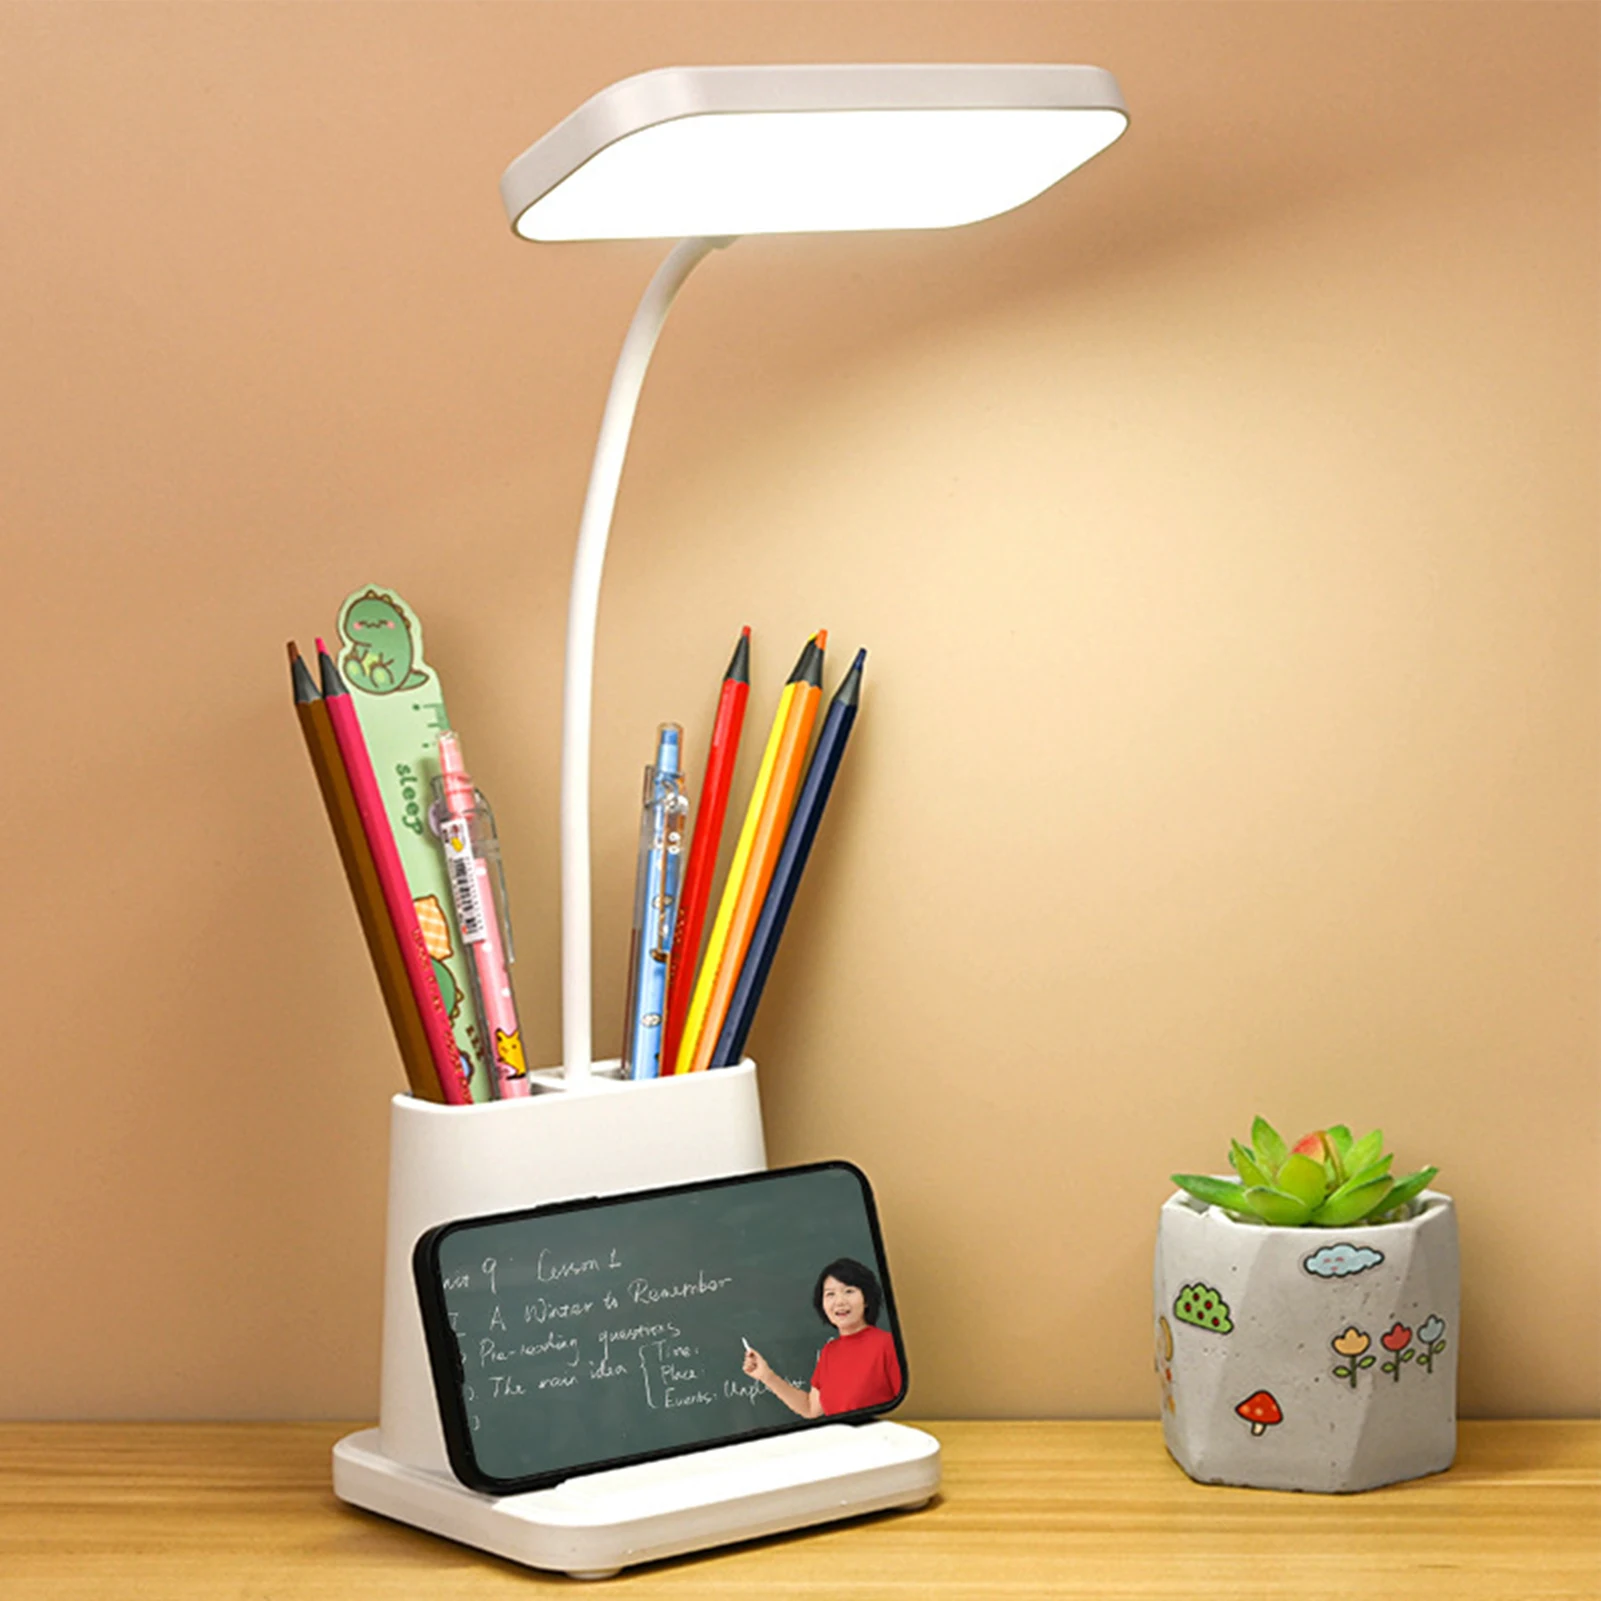 

Portable Adjustable LED Desk Lamp Sustainable Dimmable Brightness USB Charging Home Studying Bedroom Phone Pen Holder